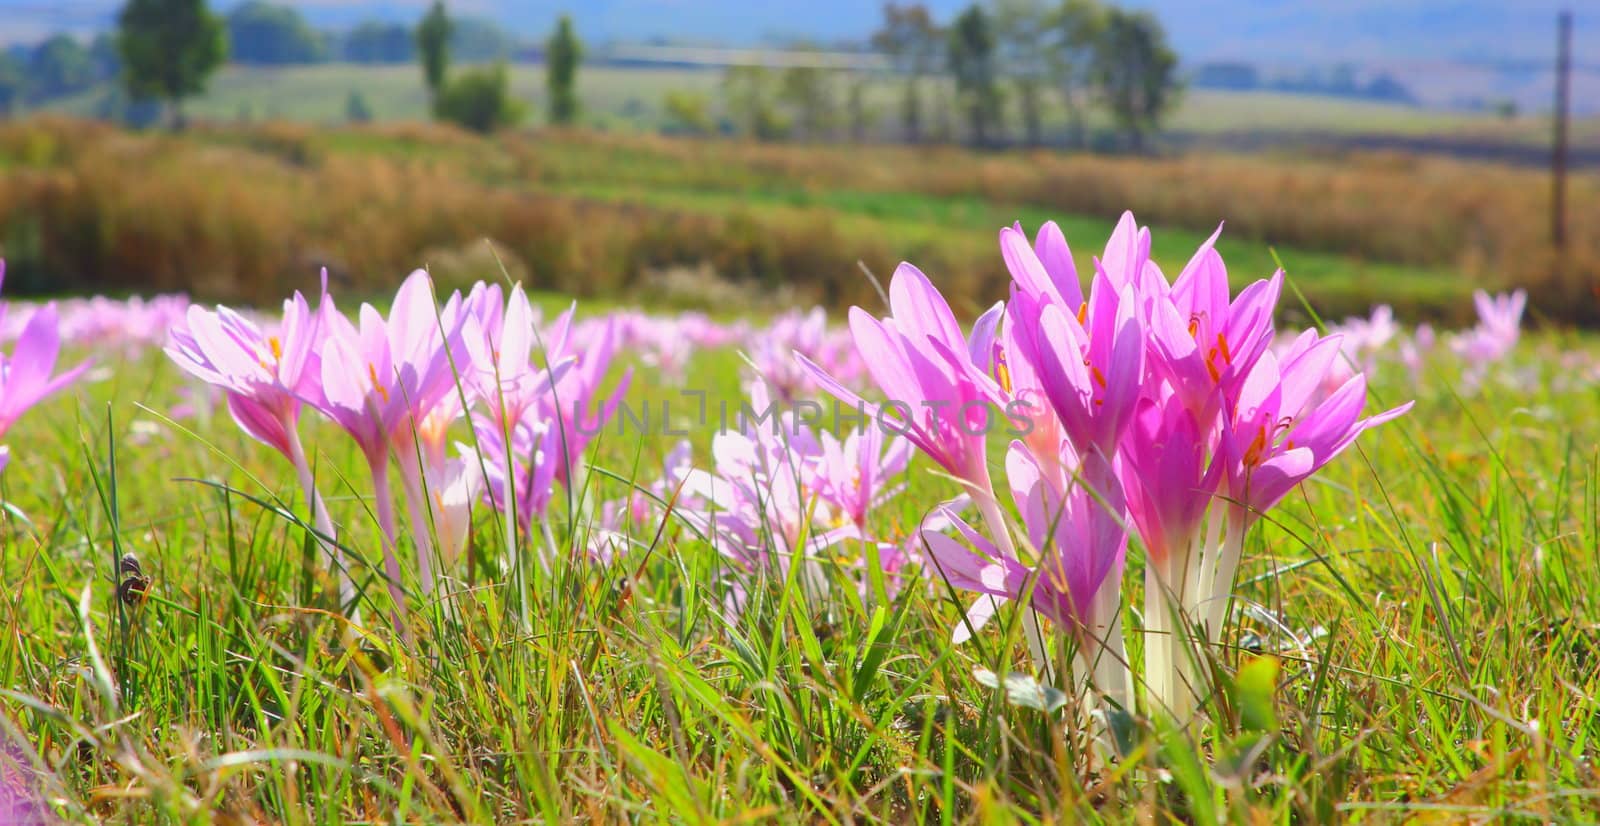 autumn crocus in the field by taviphoto